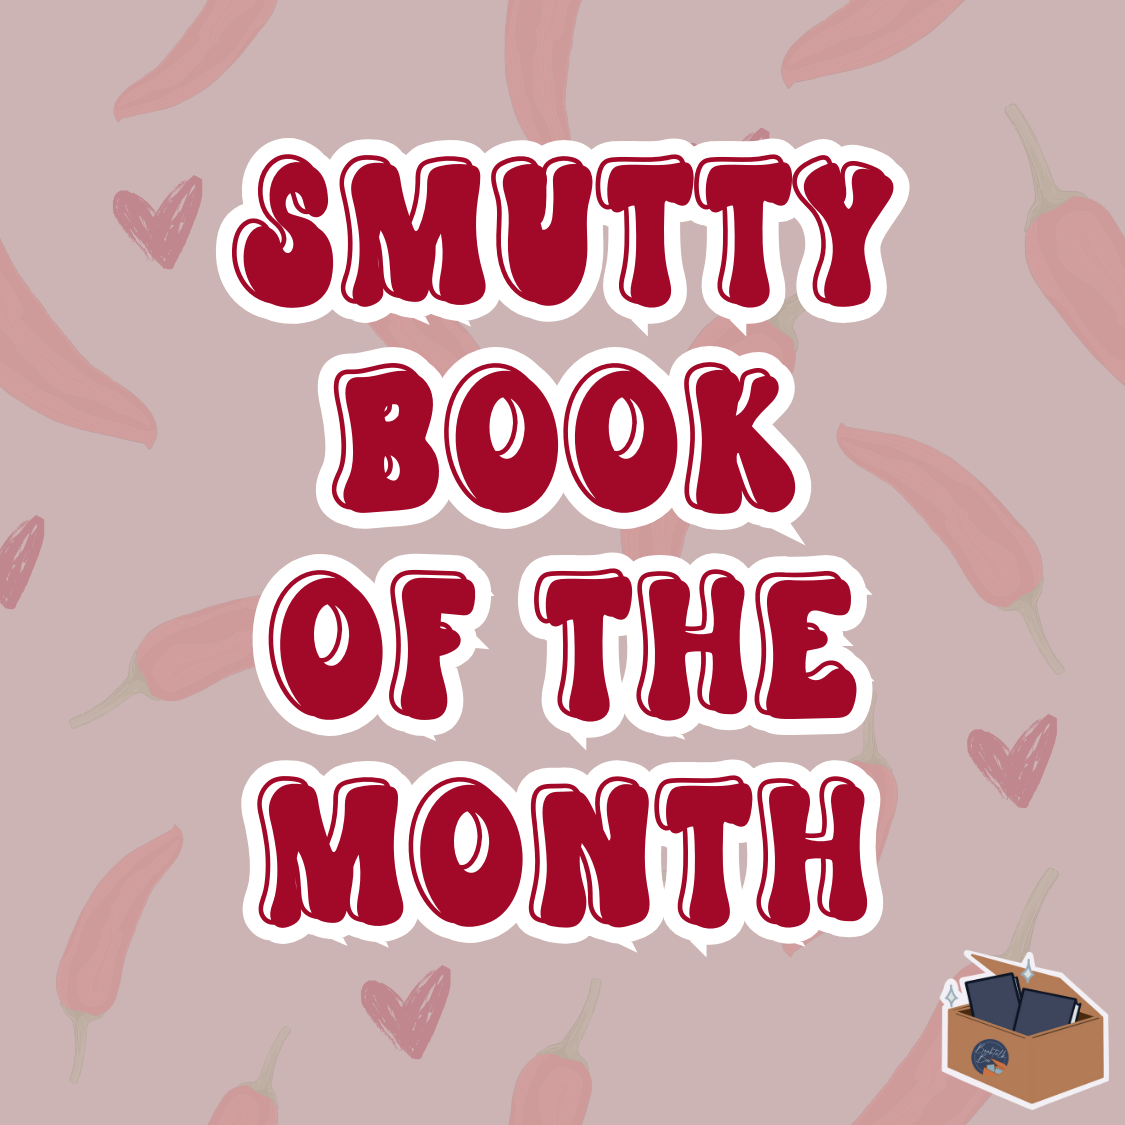 Smutty Romance Book of the Month